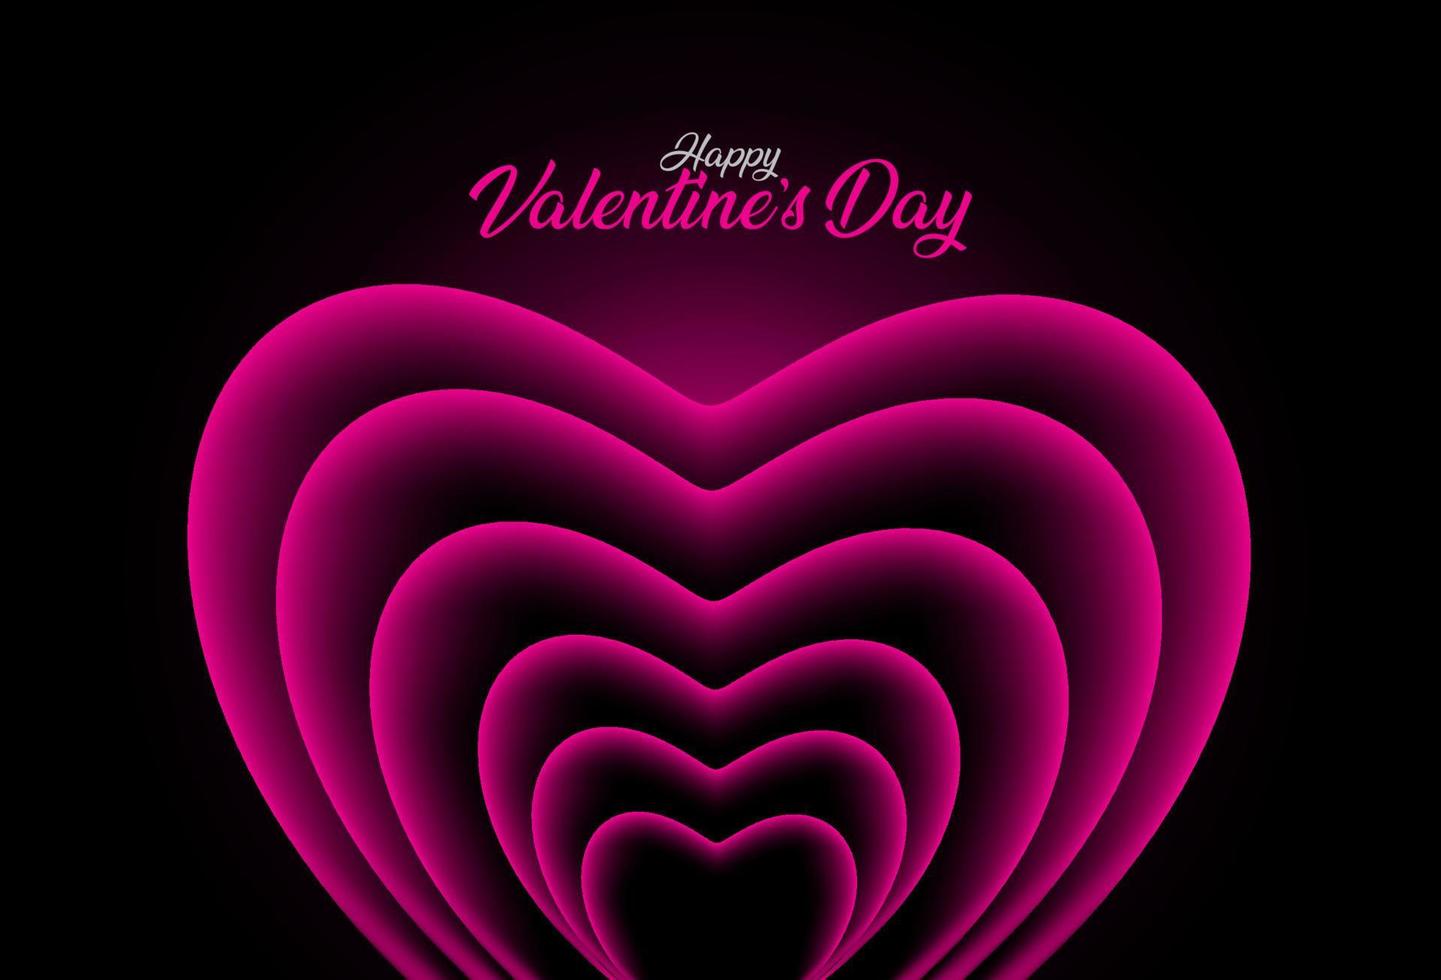 Valentine's card black and dark night background with pink heart shape vector